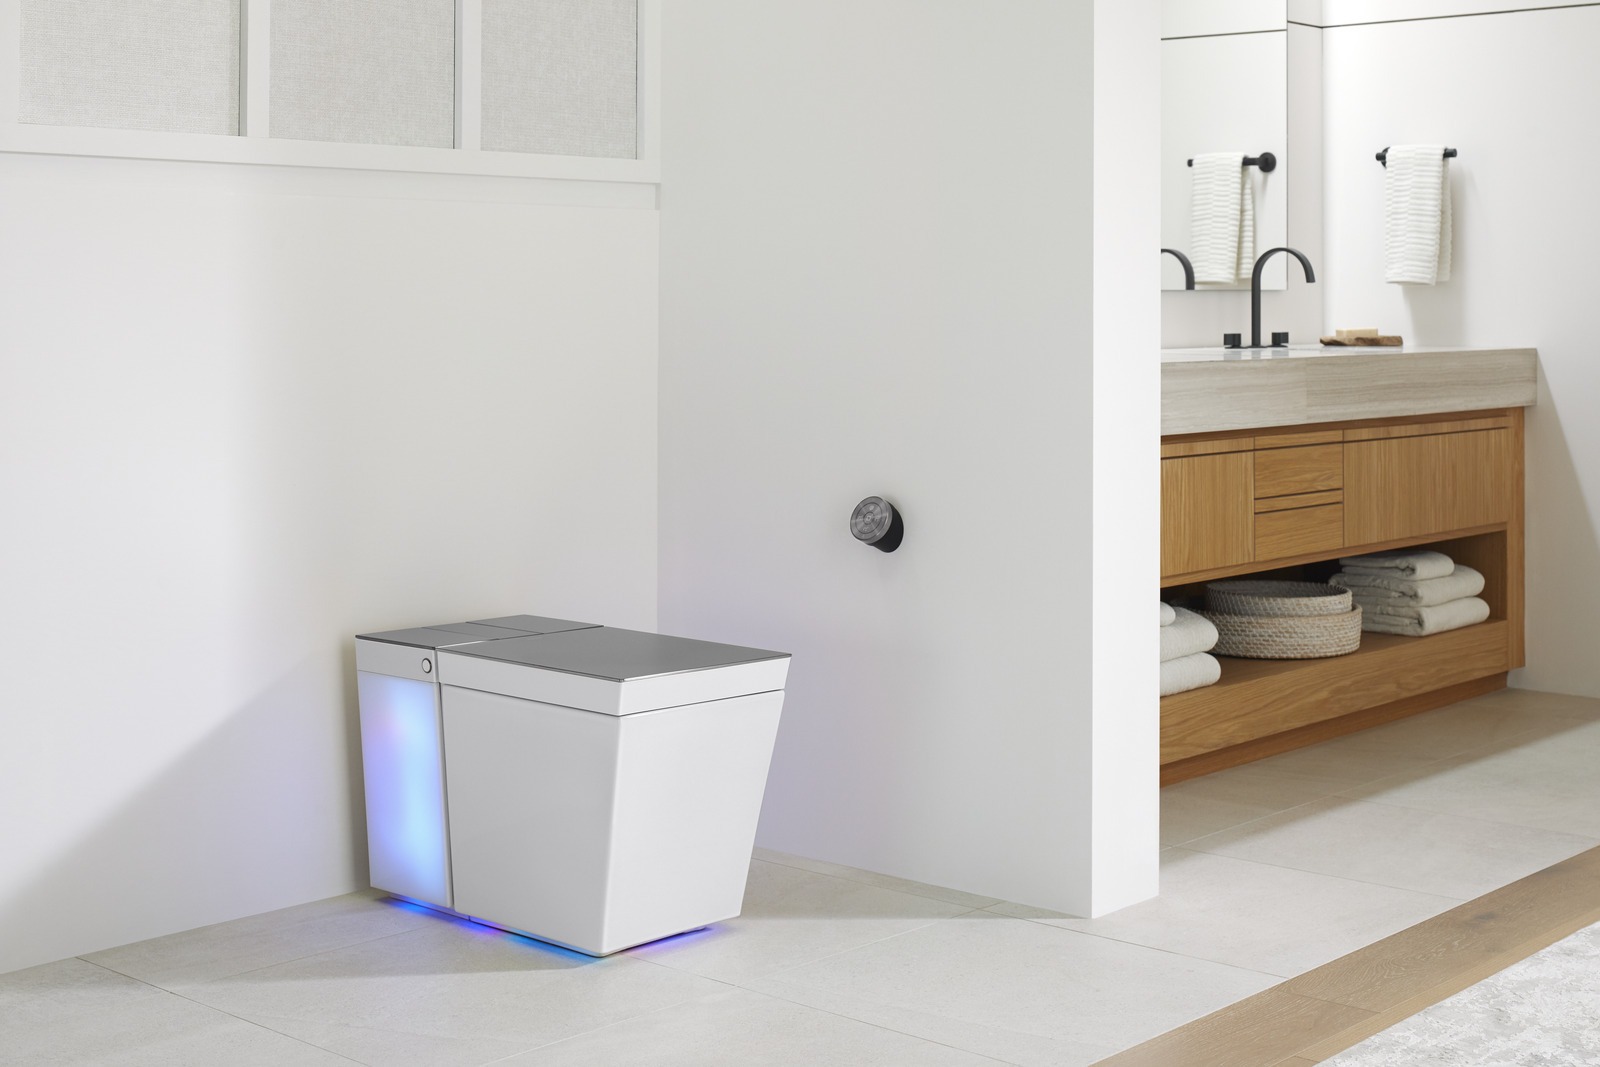 18 ELECTRIC INVENTIONS TO MAKE YOUR HOME SMART 